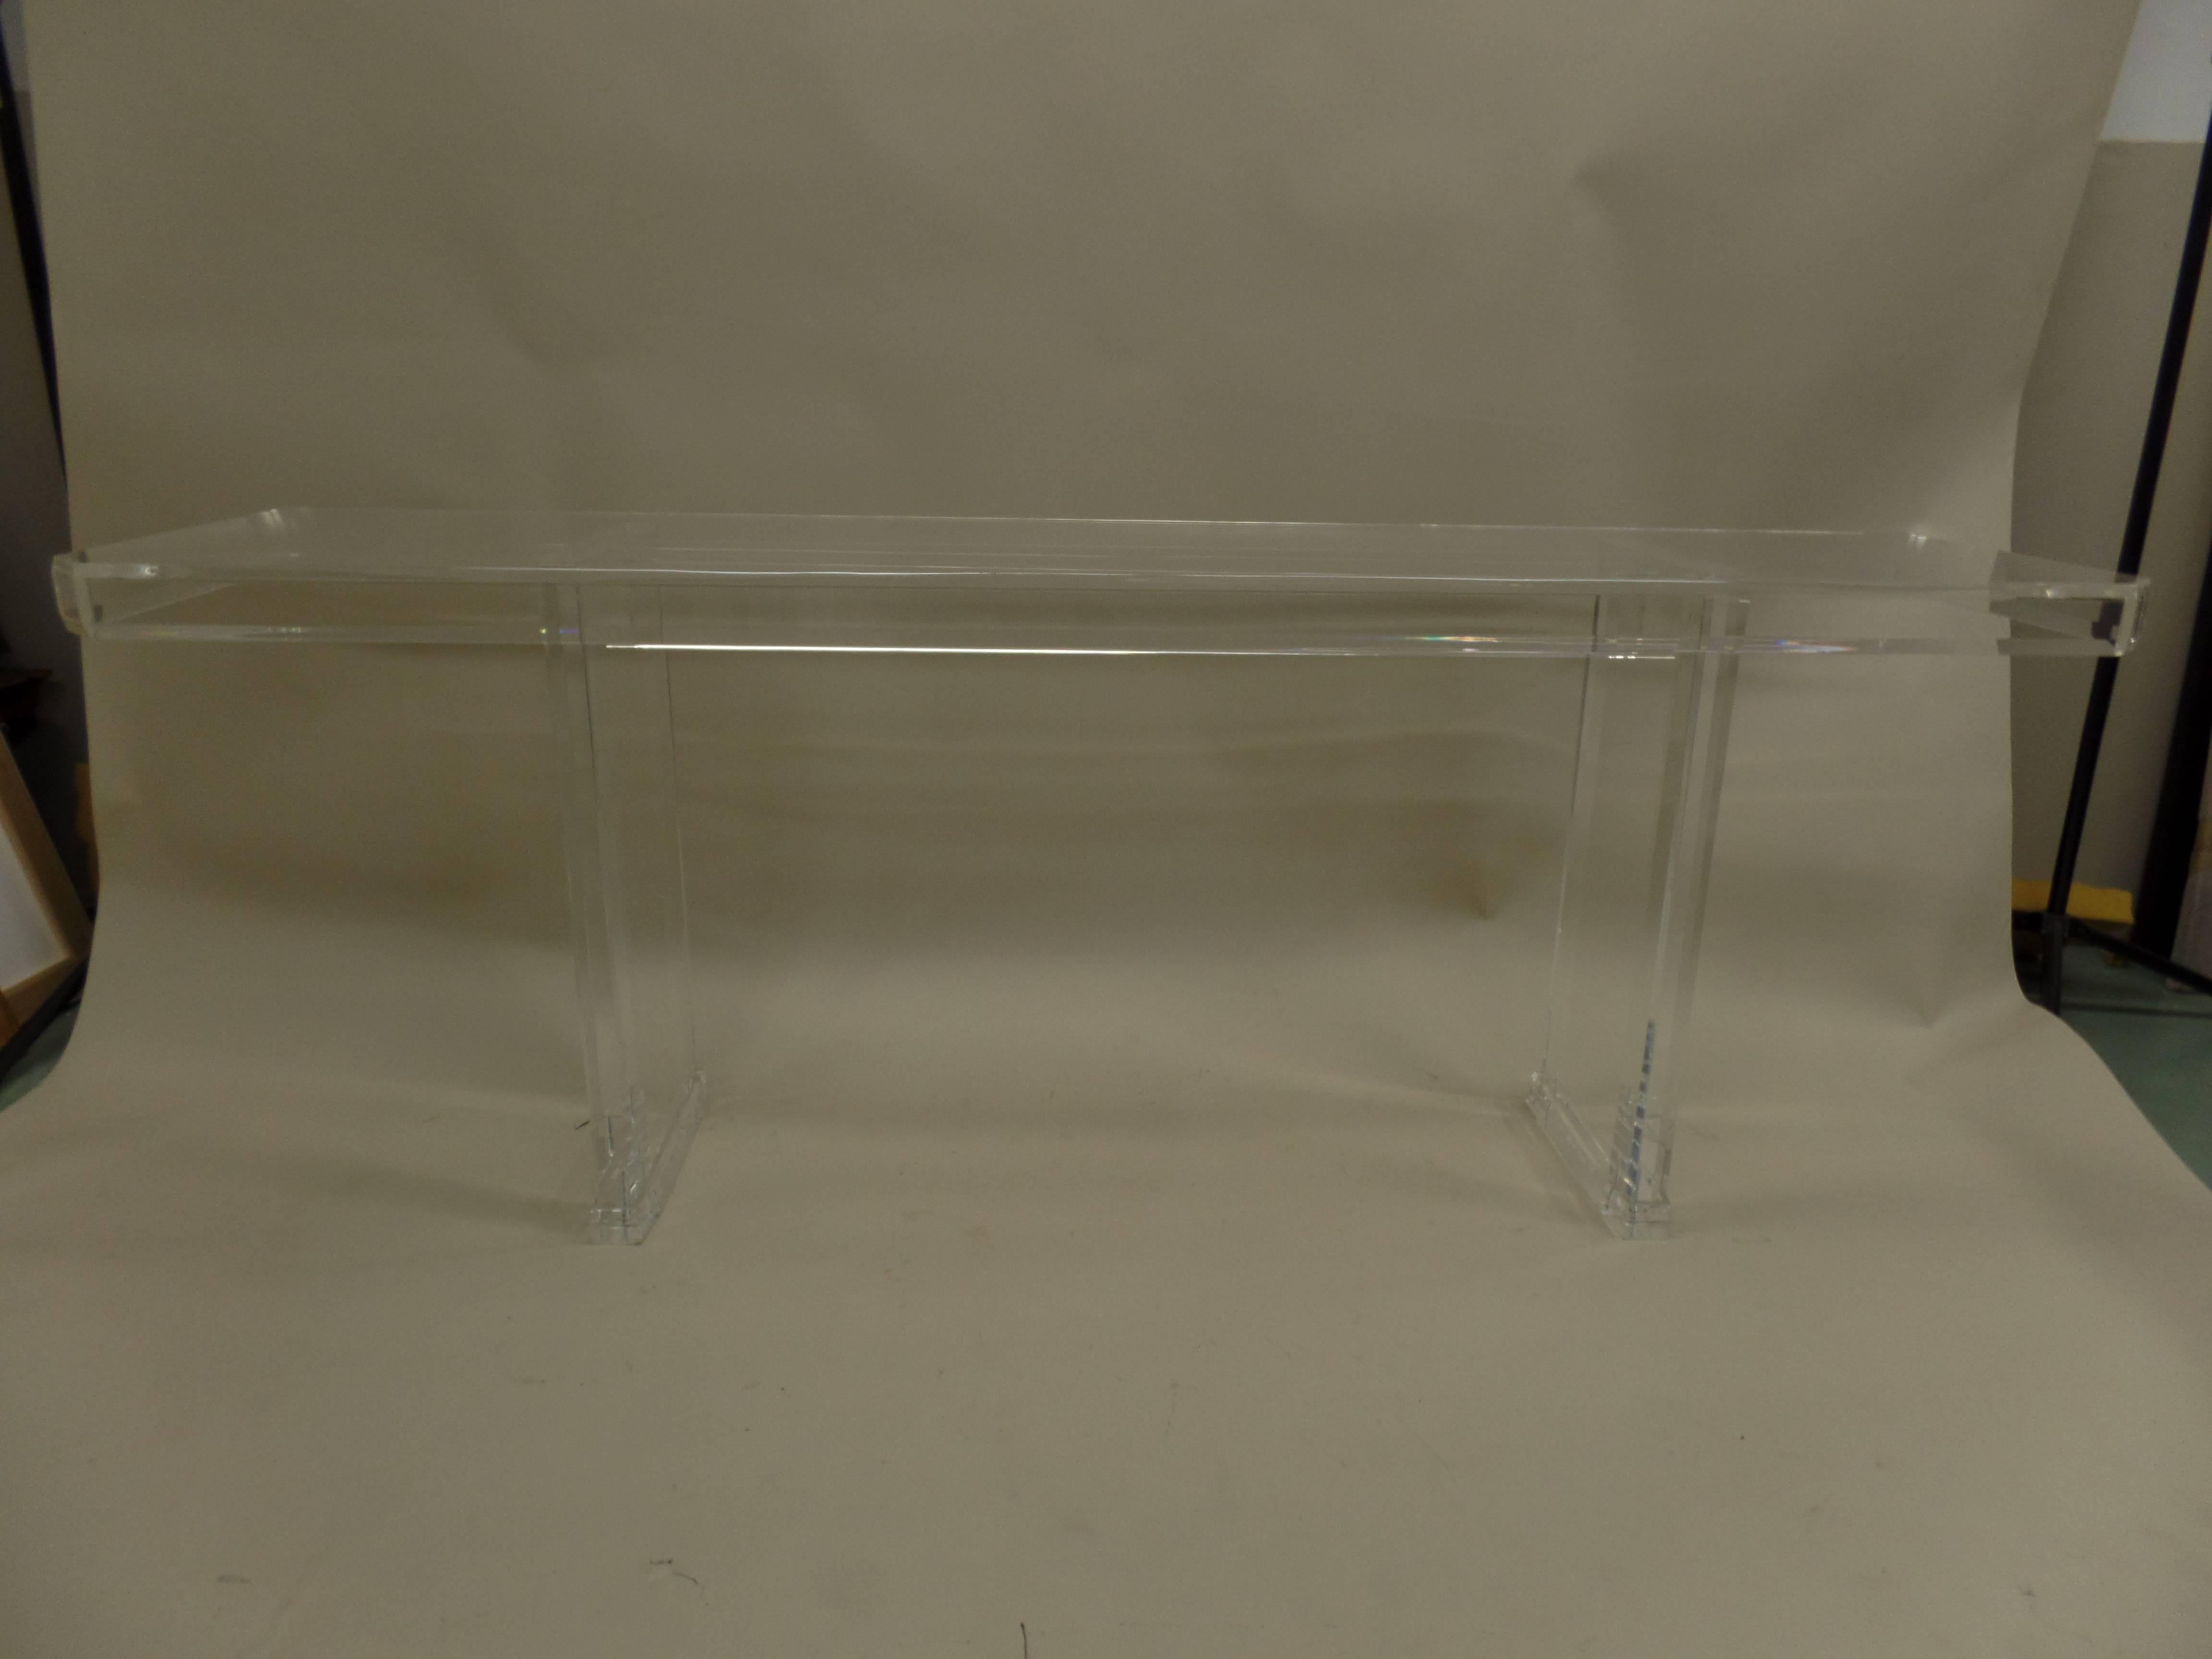 Large elegant French Mid-Century Modern sofa table or console in plexiglass. The bases and top are both in Lucite providing total transparency. 

References: Minimalism, Space Age, 